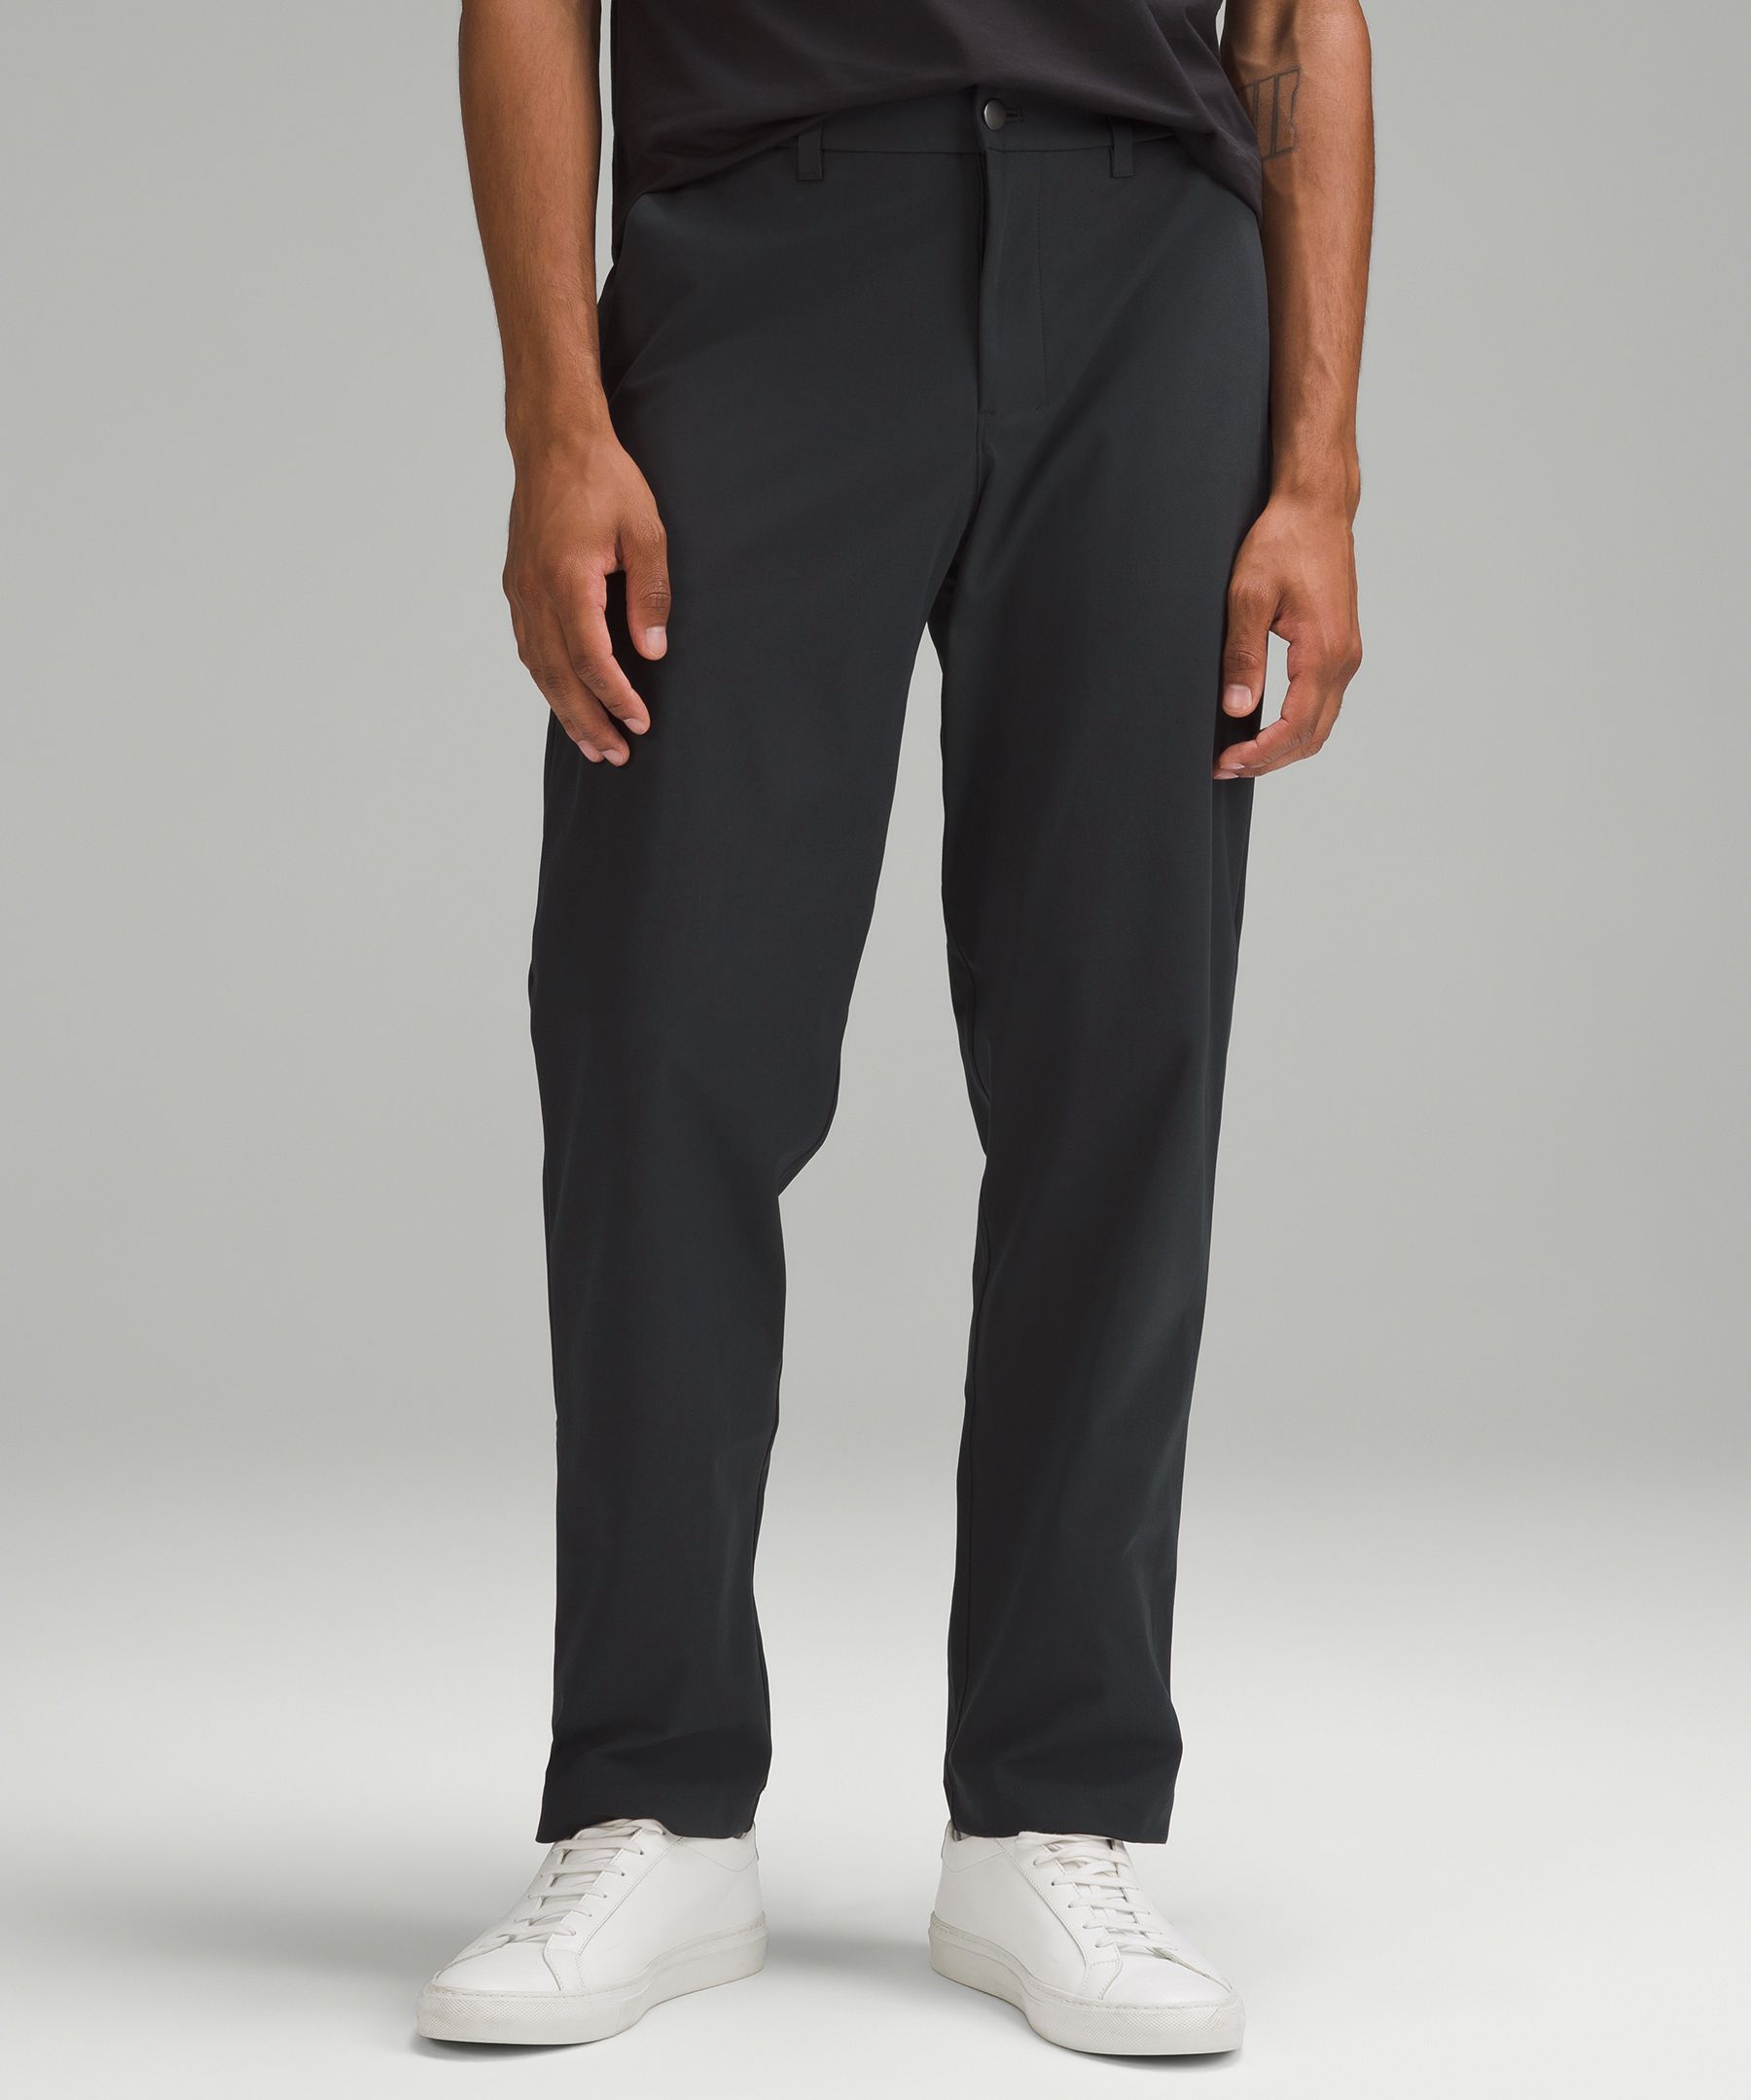 Lululemon Abc Relaxed-fit Trousers 32"l Warpstreme